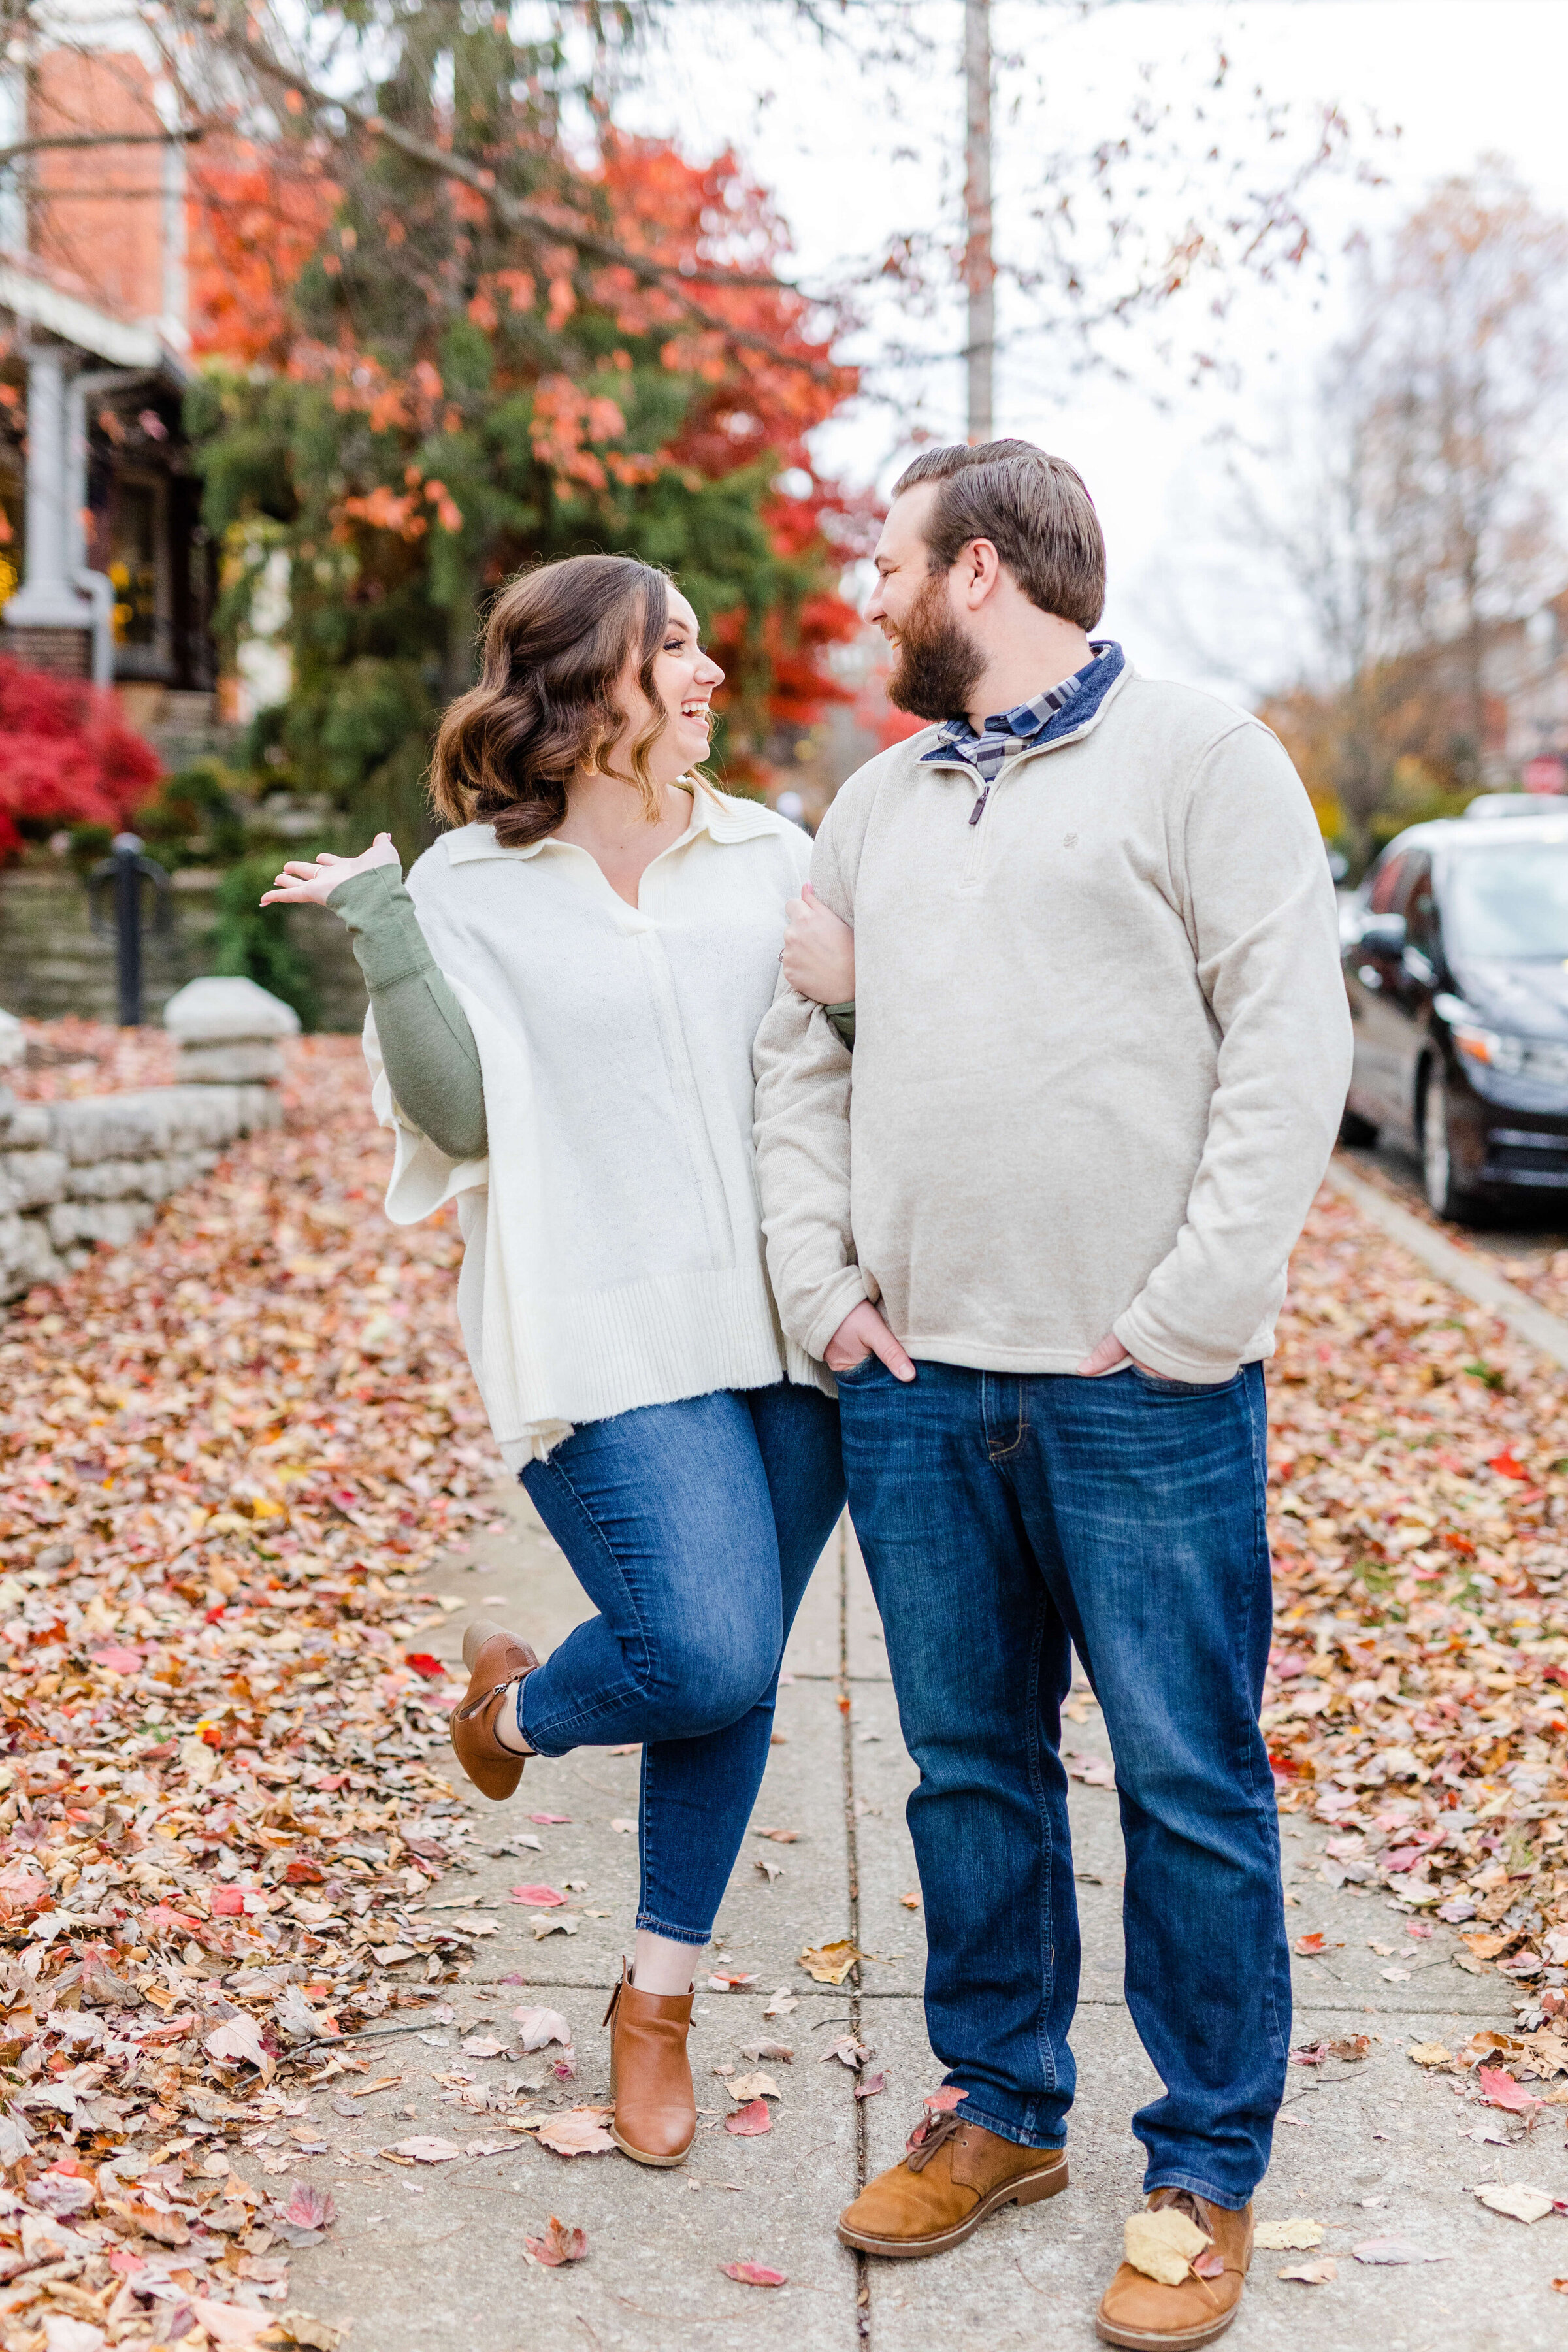 A man and woman in jeans and ivory sweaters stand arm in arm next to one another as the fall leaves are all around them. The girl is happy and has her leg and arm in the air. Taken by a lexington wedding photographer